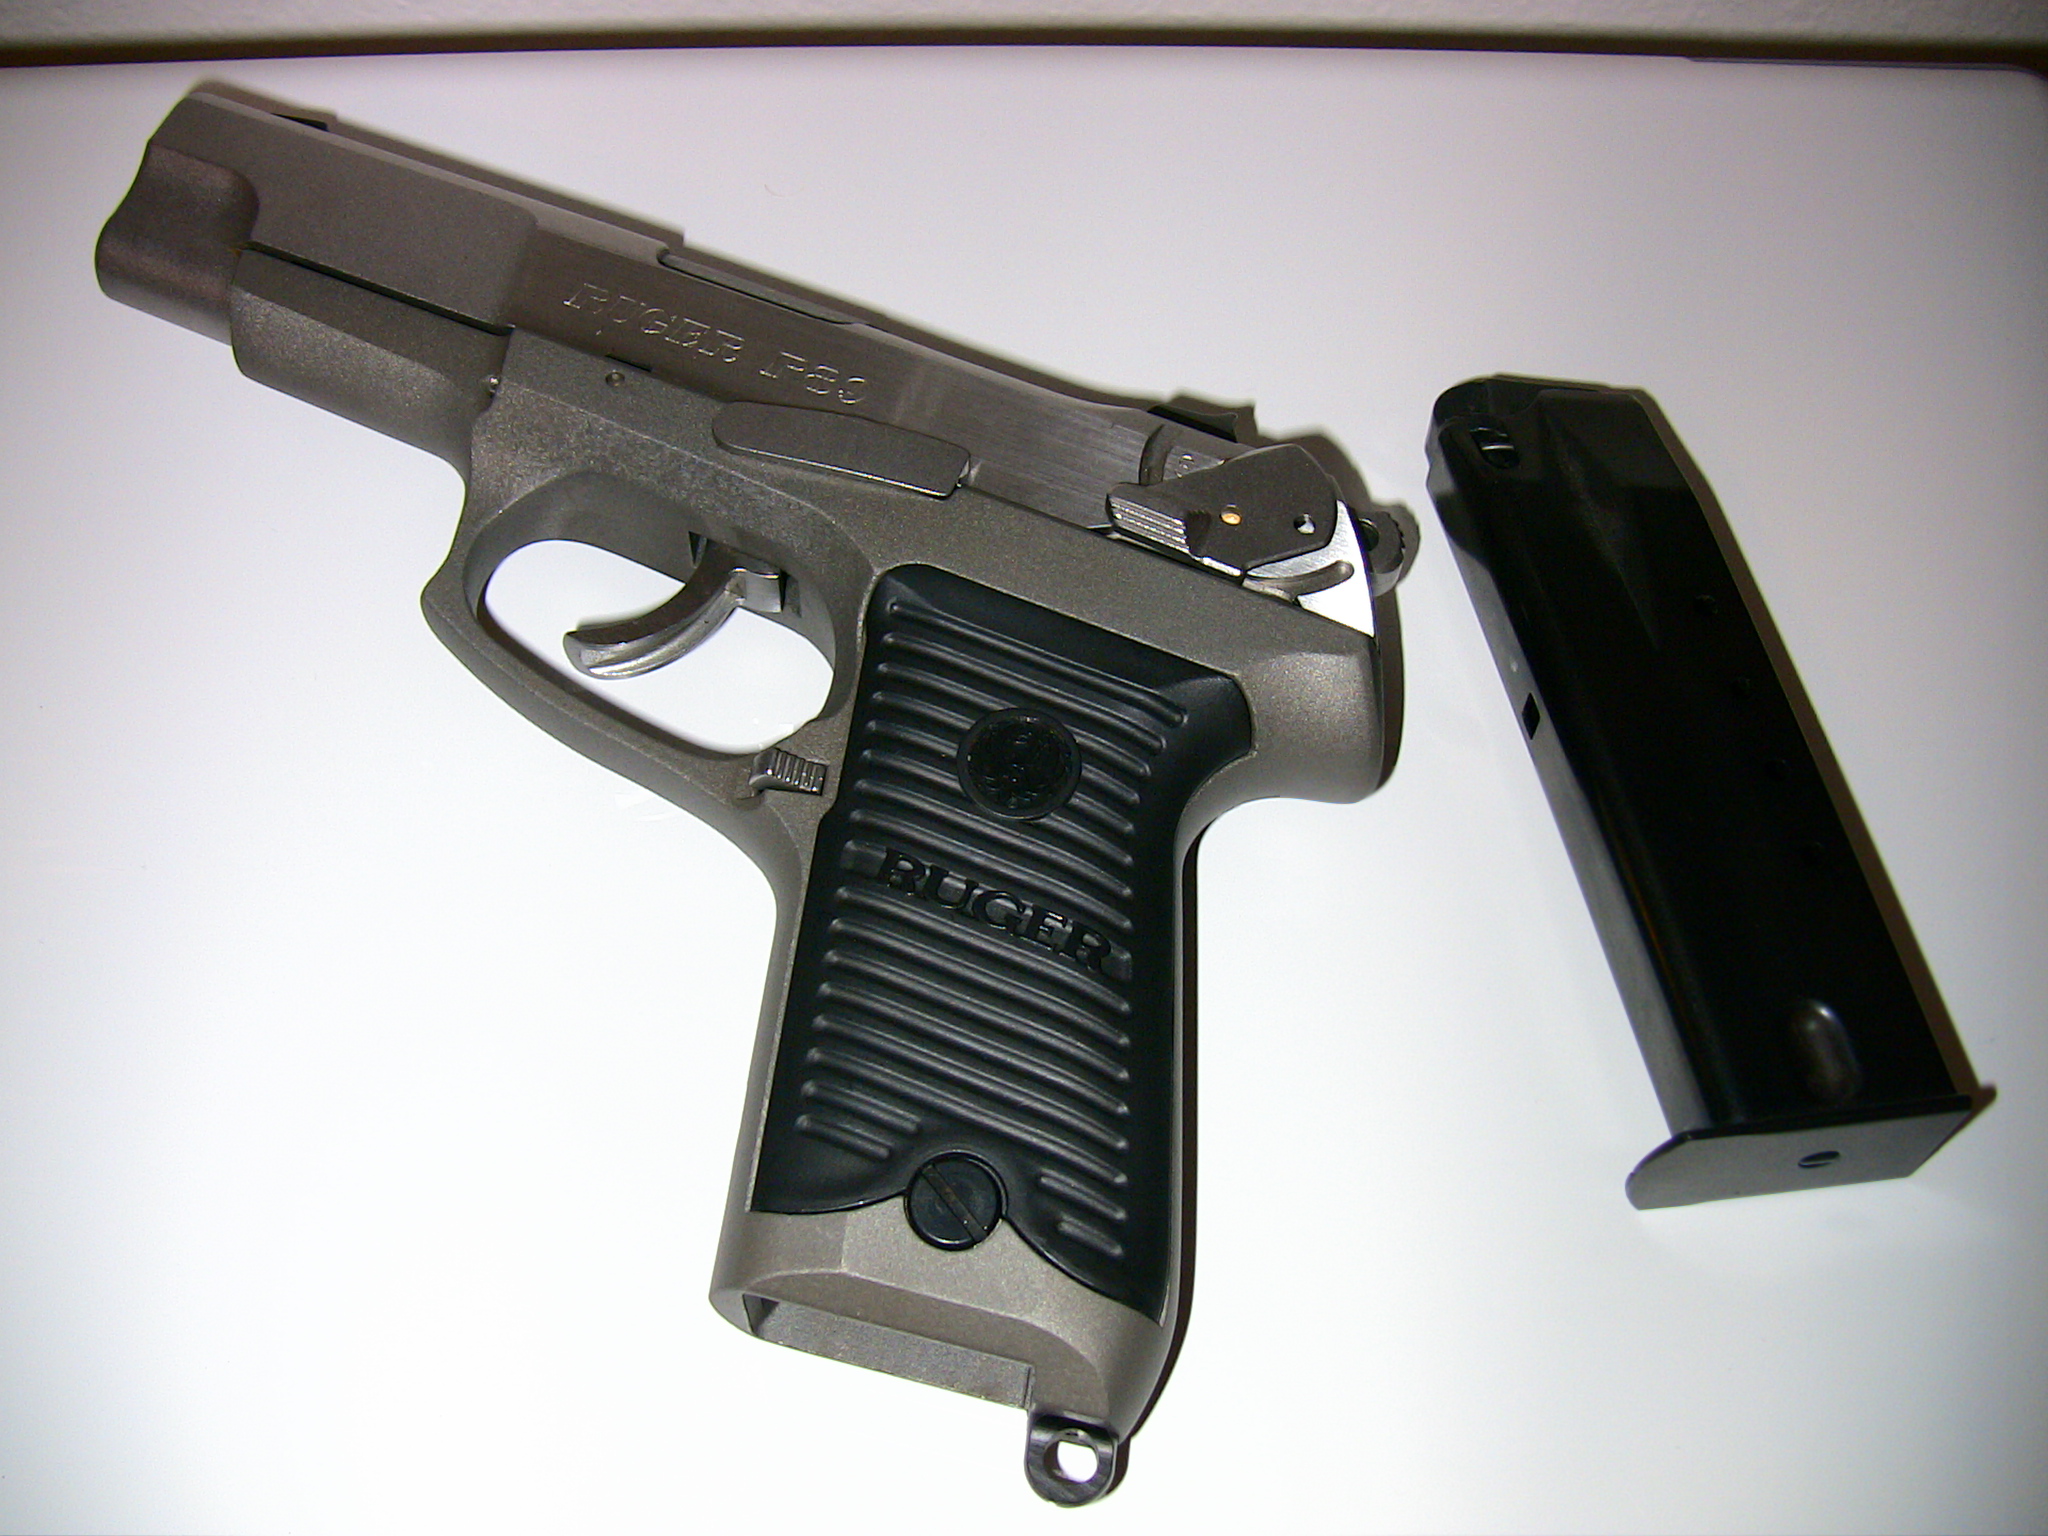 the pistol sits next to a smaller black object